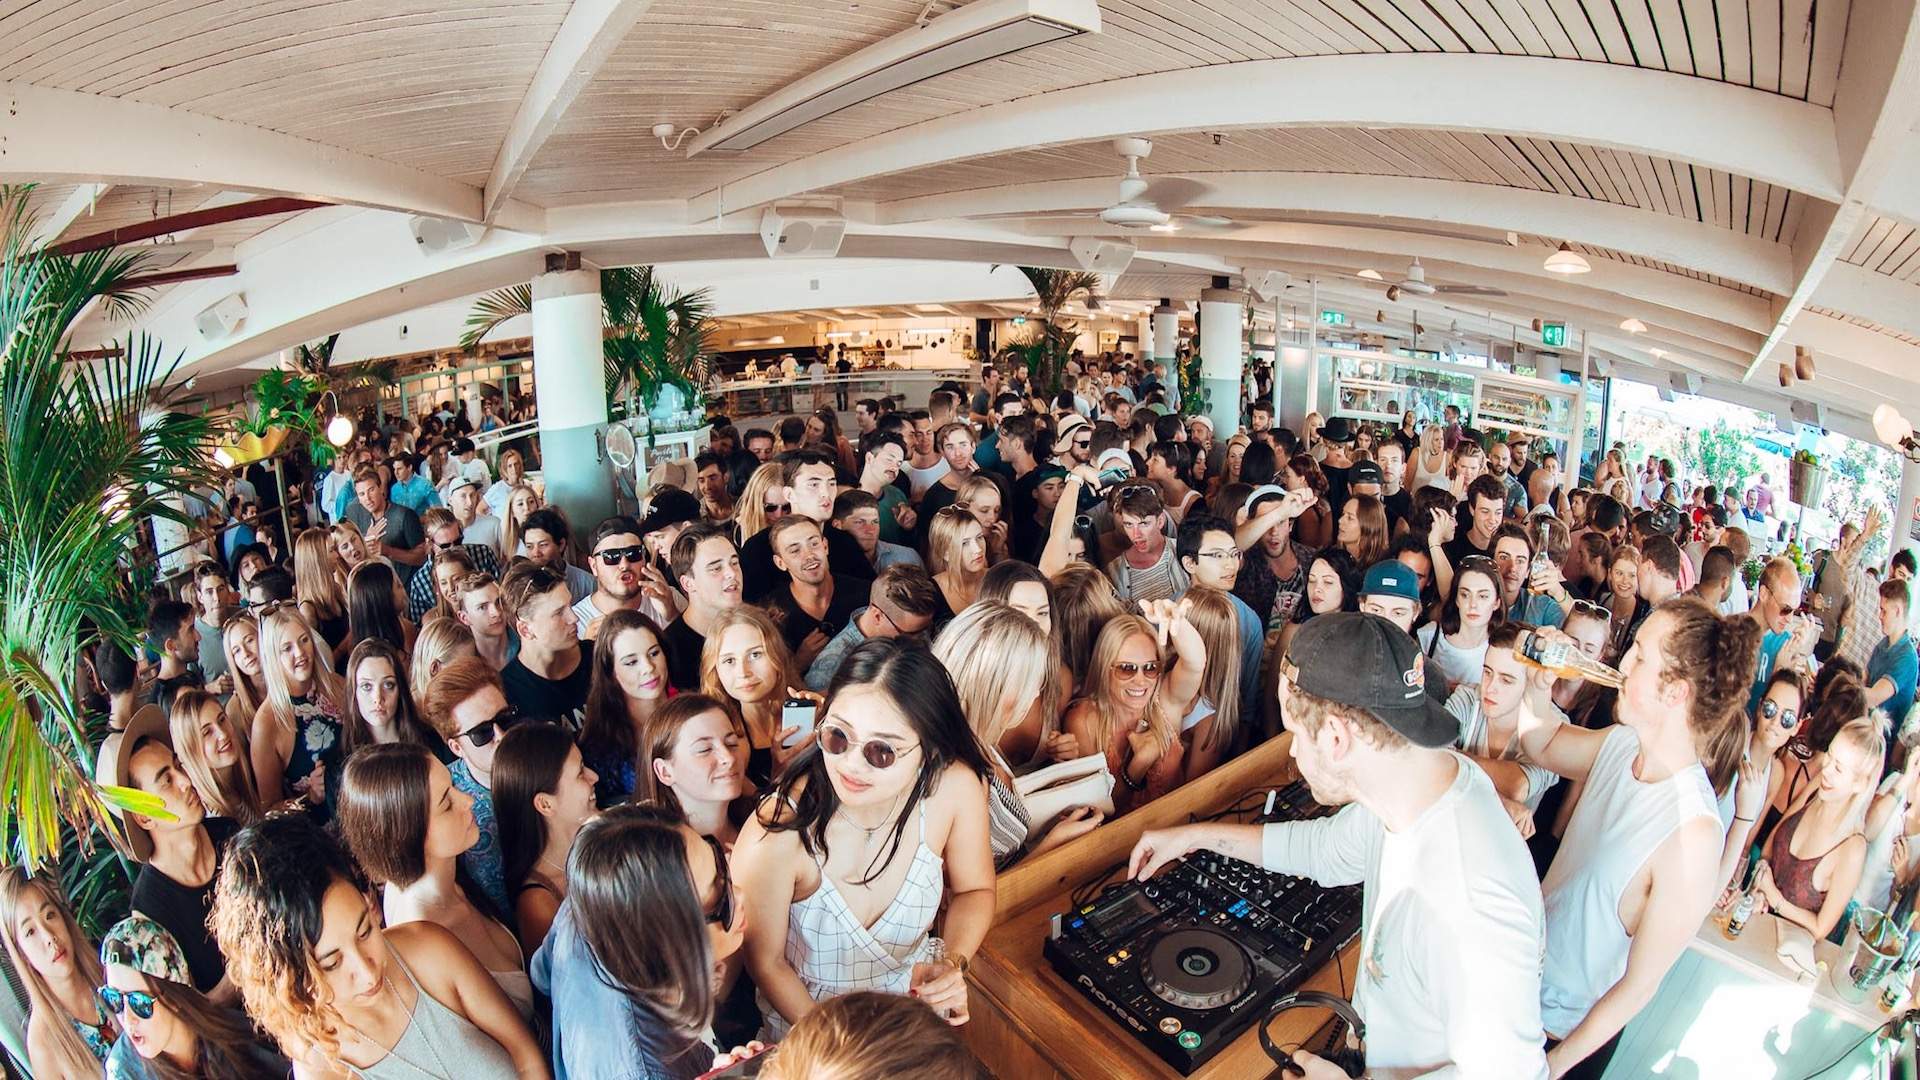 We're Giving Away Passes to Coogee Pavilion's Surprise Rooftop Gig